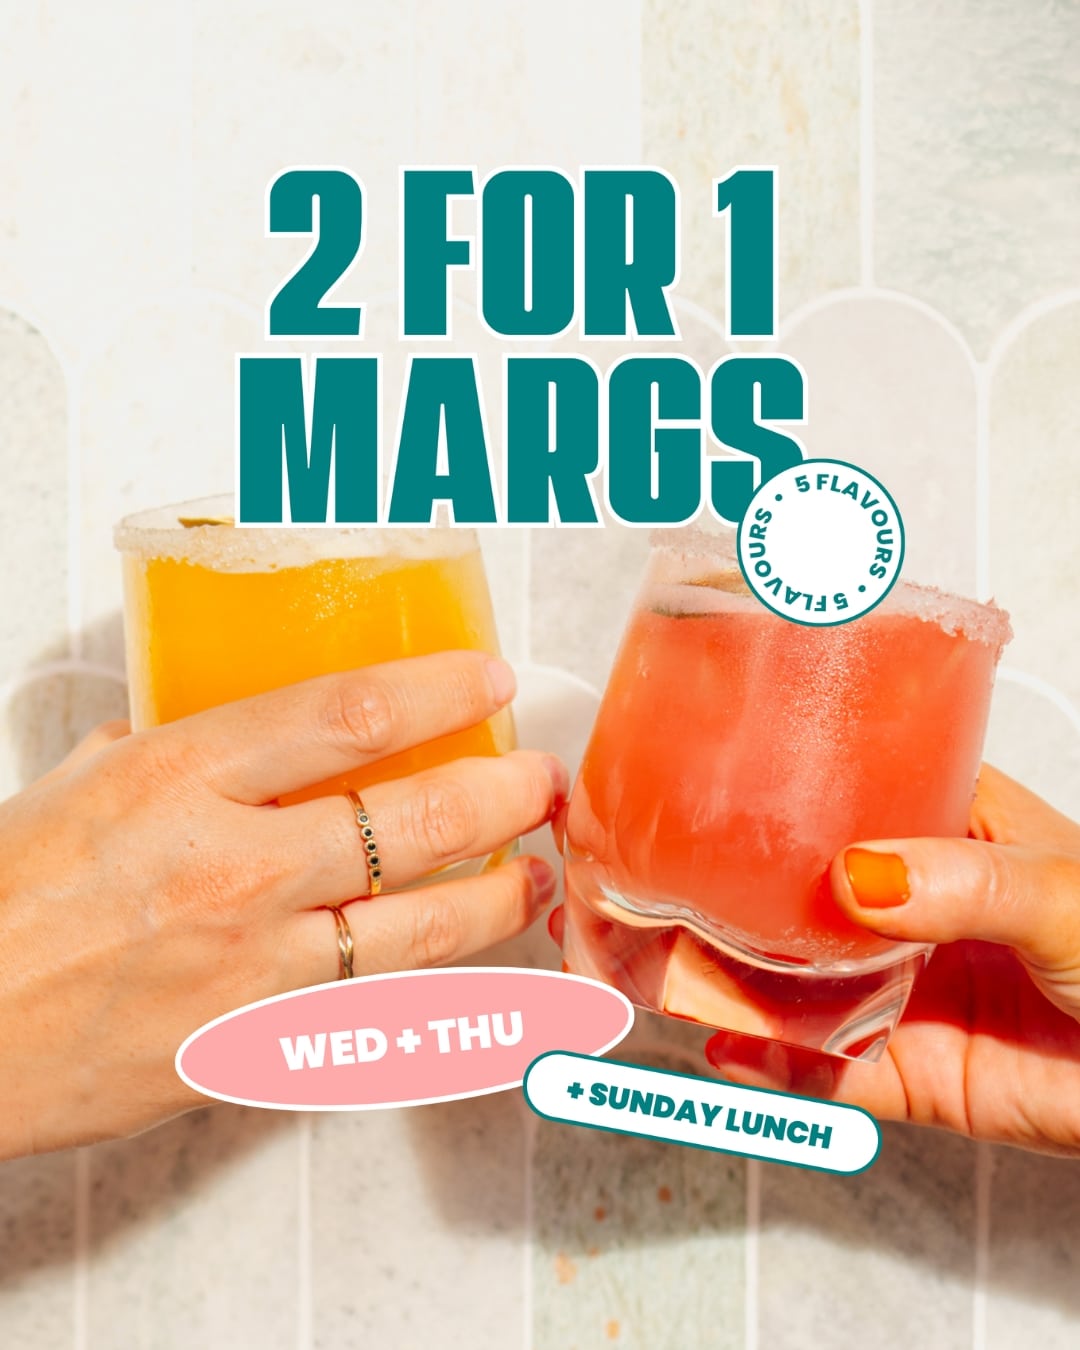 2 FOR 1 MARGS